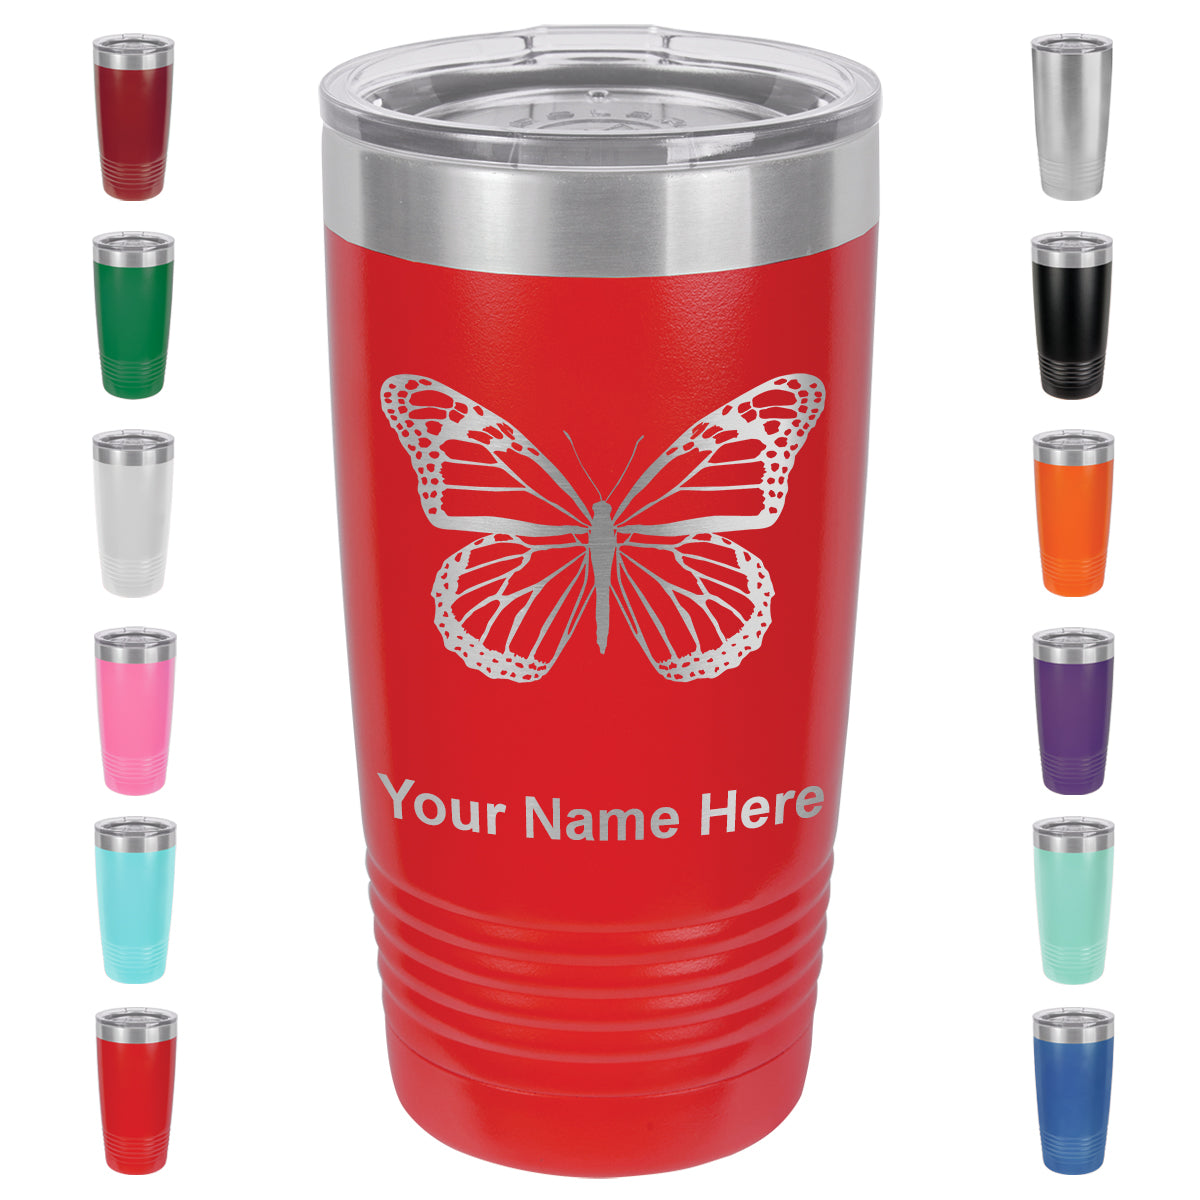 20oz Vacuum Insulated Tumbler Mug, Monarch Butterfly, Personalized Engraving Included